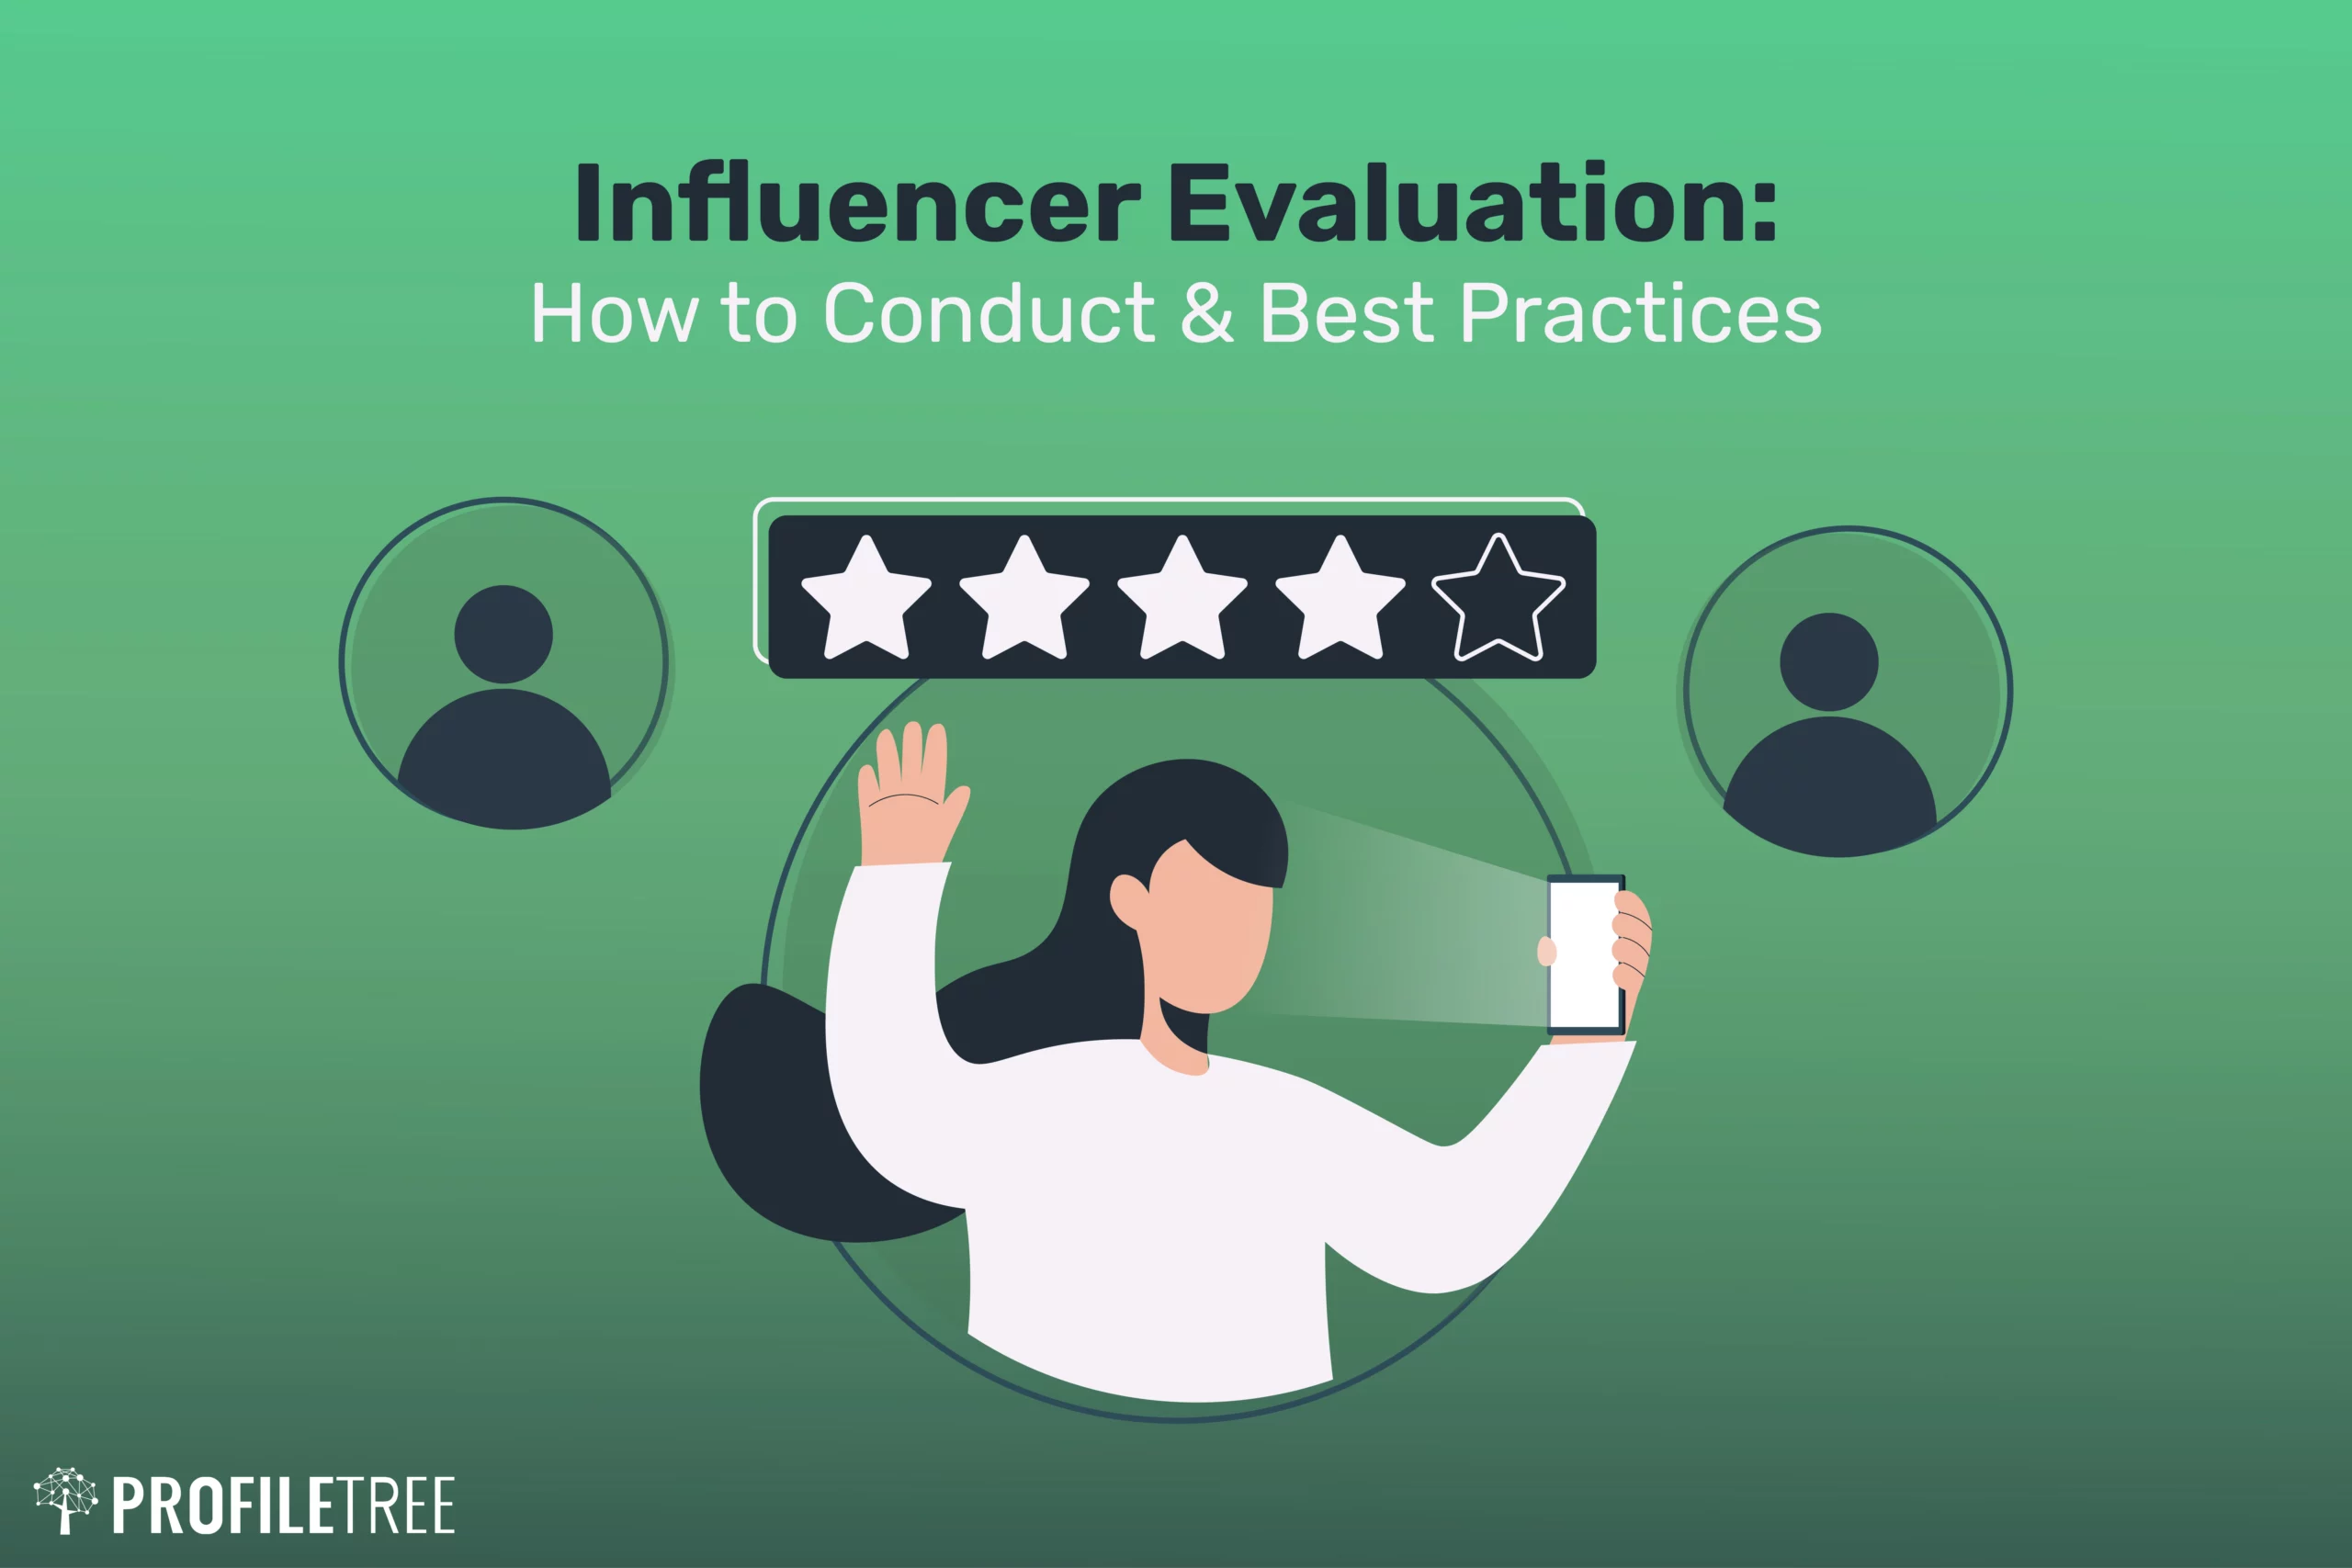 Influencer Evaluation How to Conduct & Best Practices